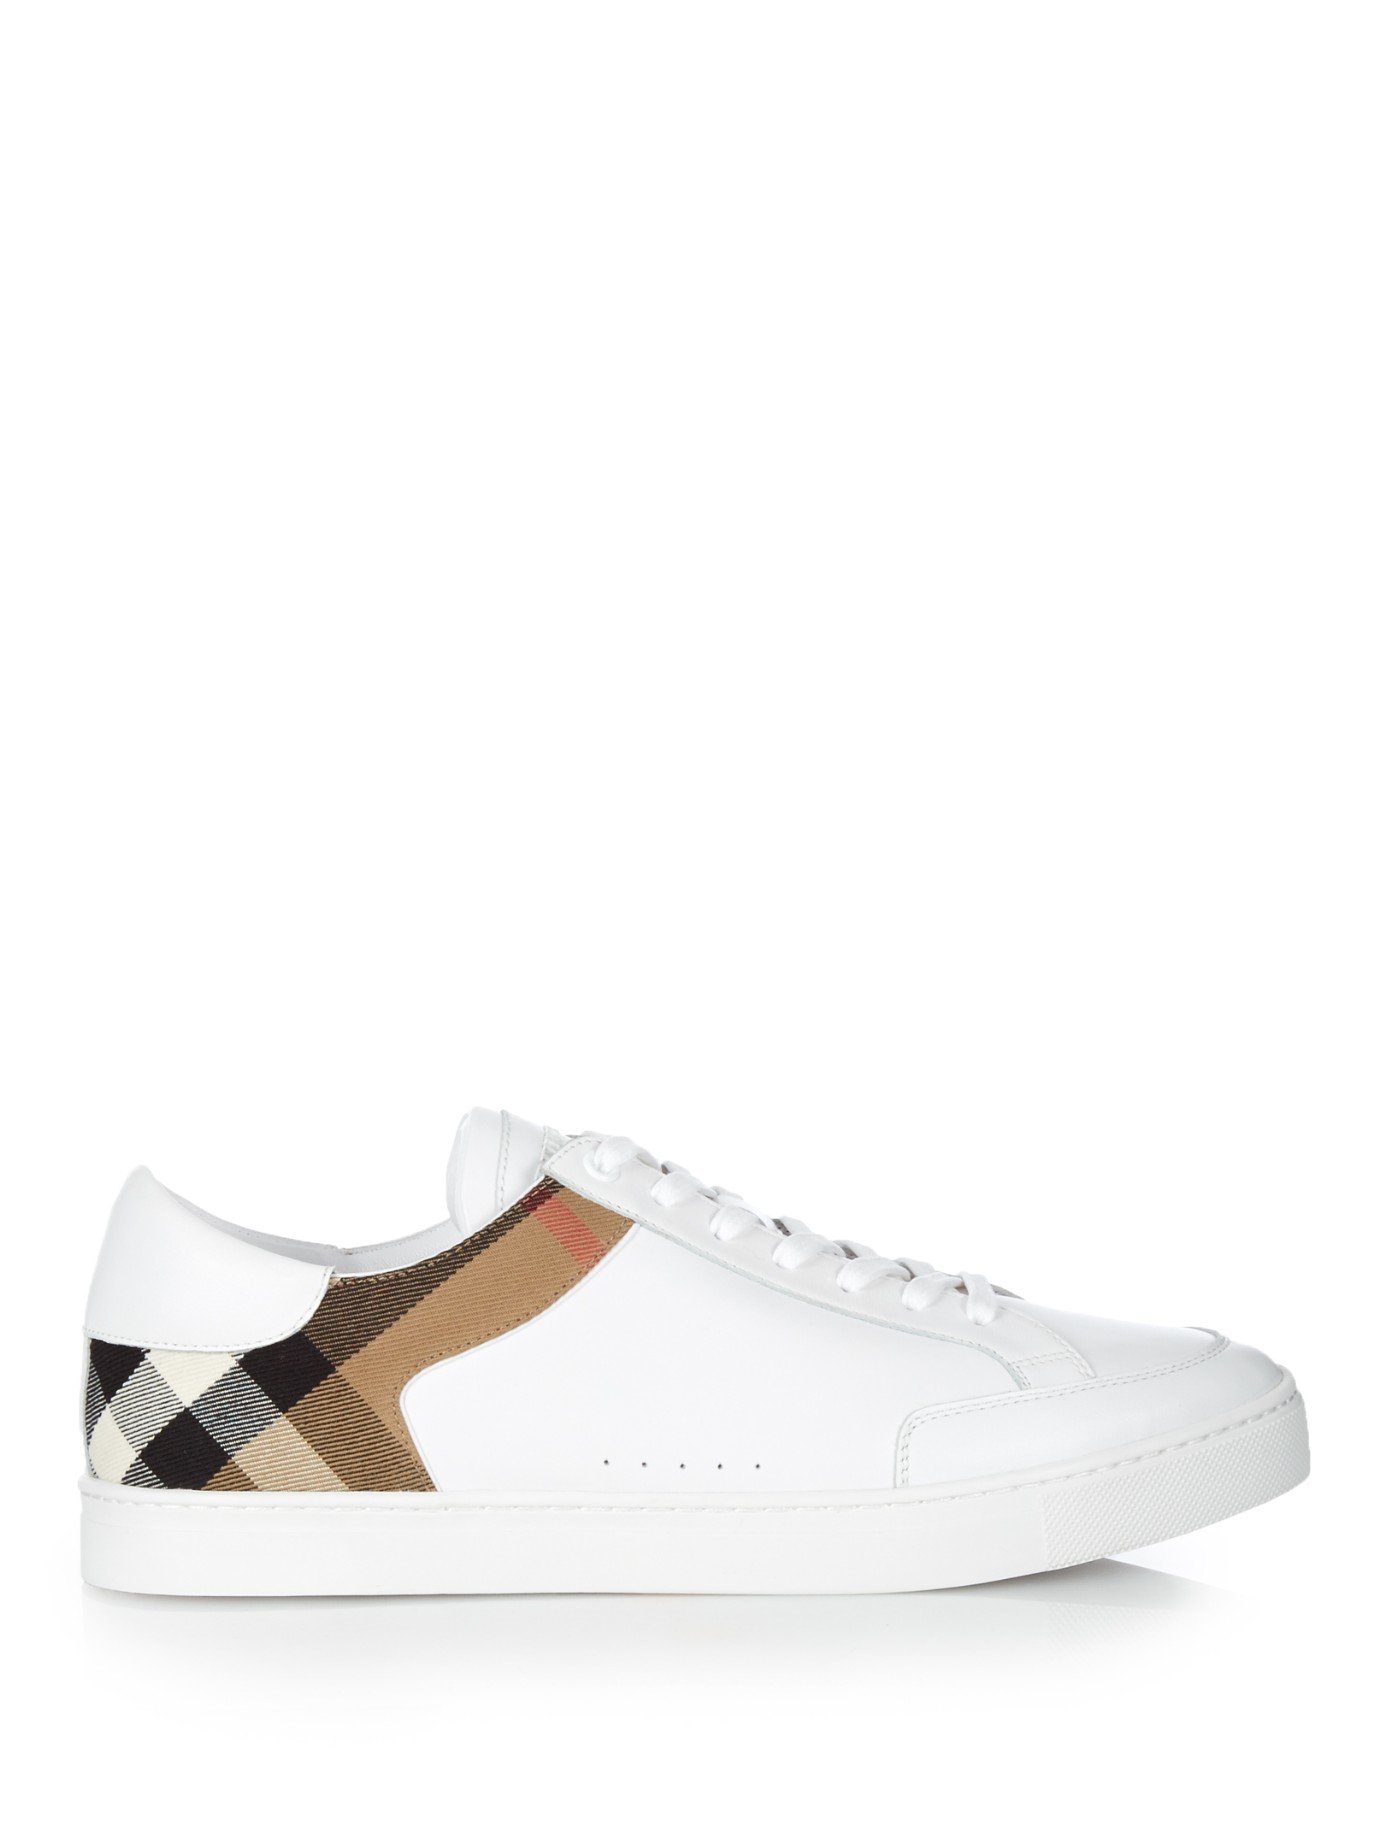 burberry white trainers